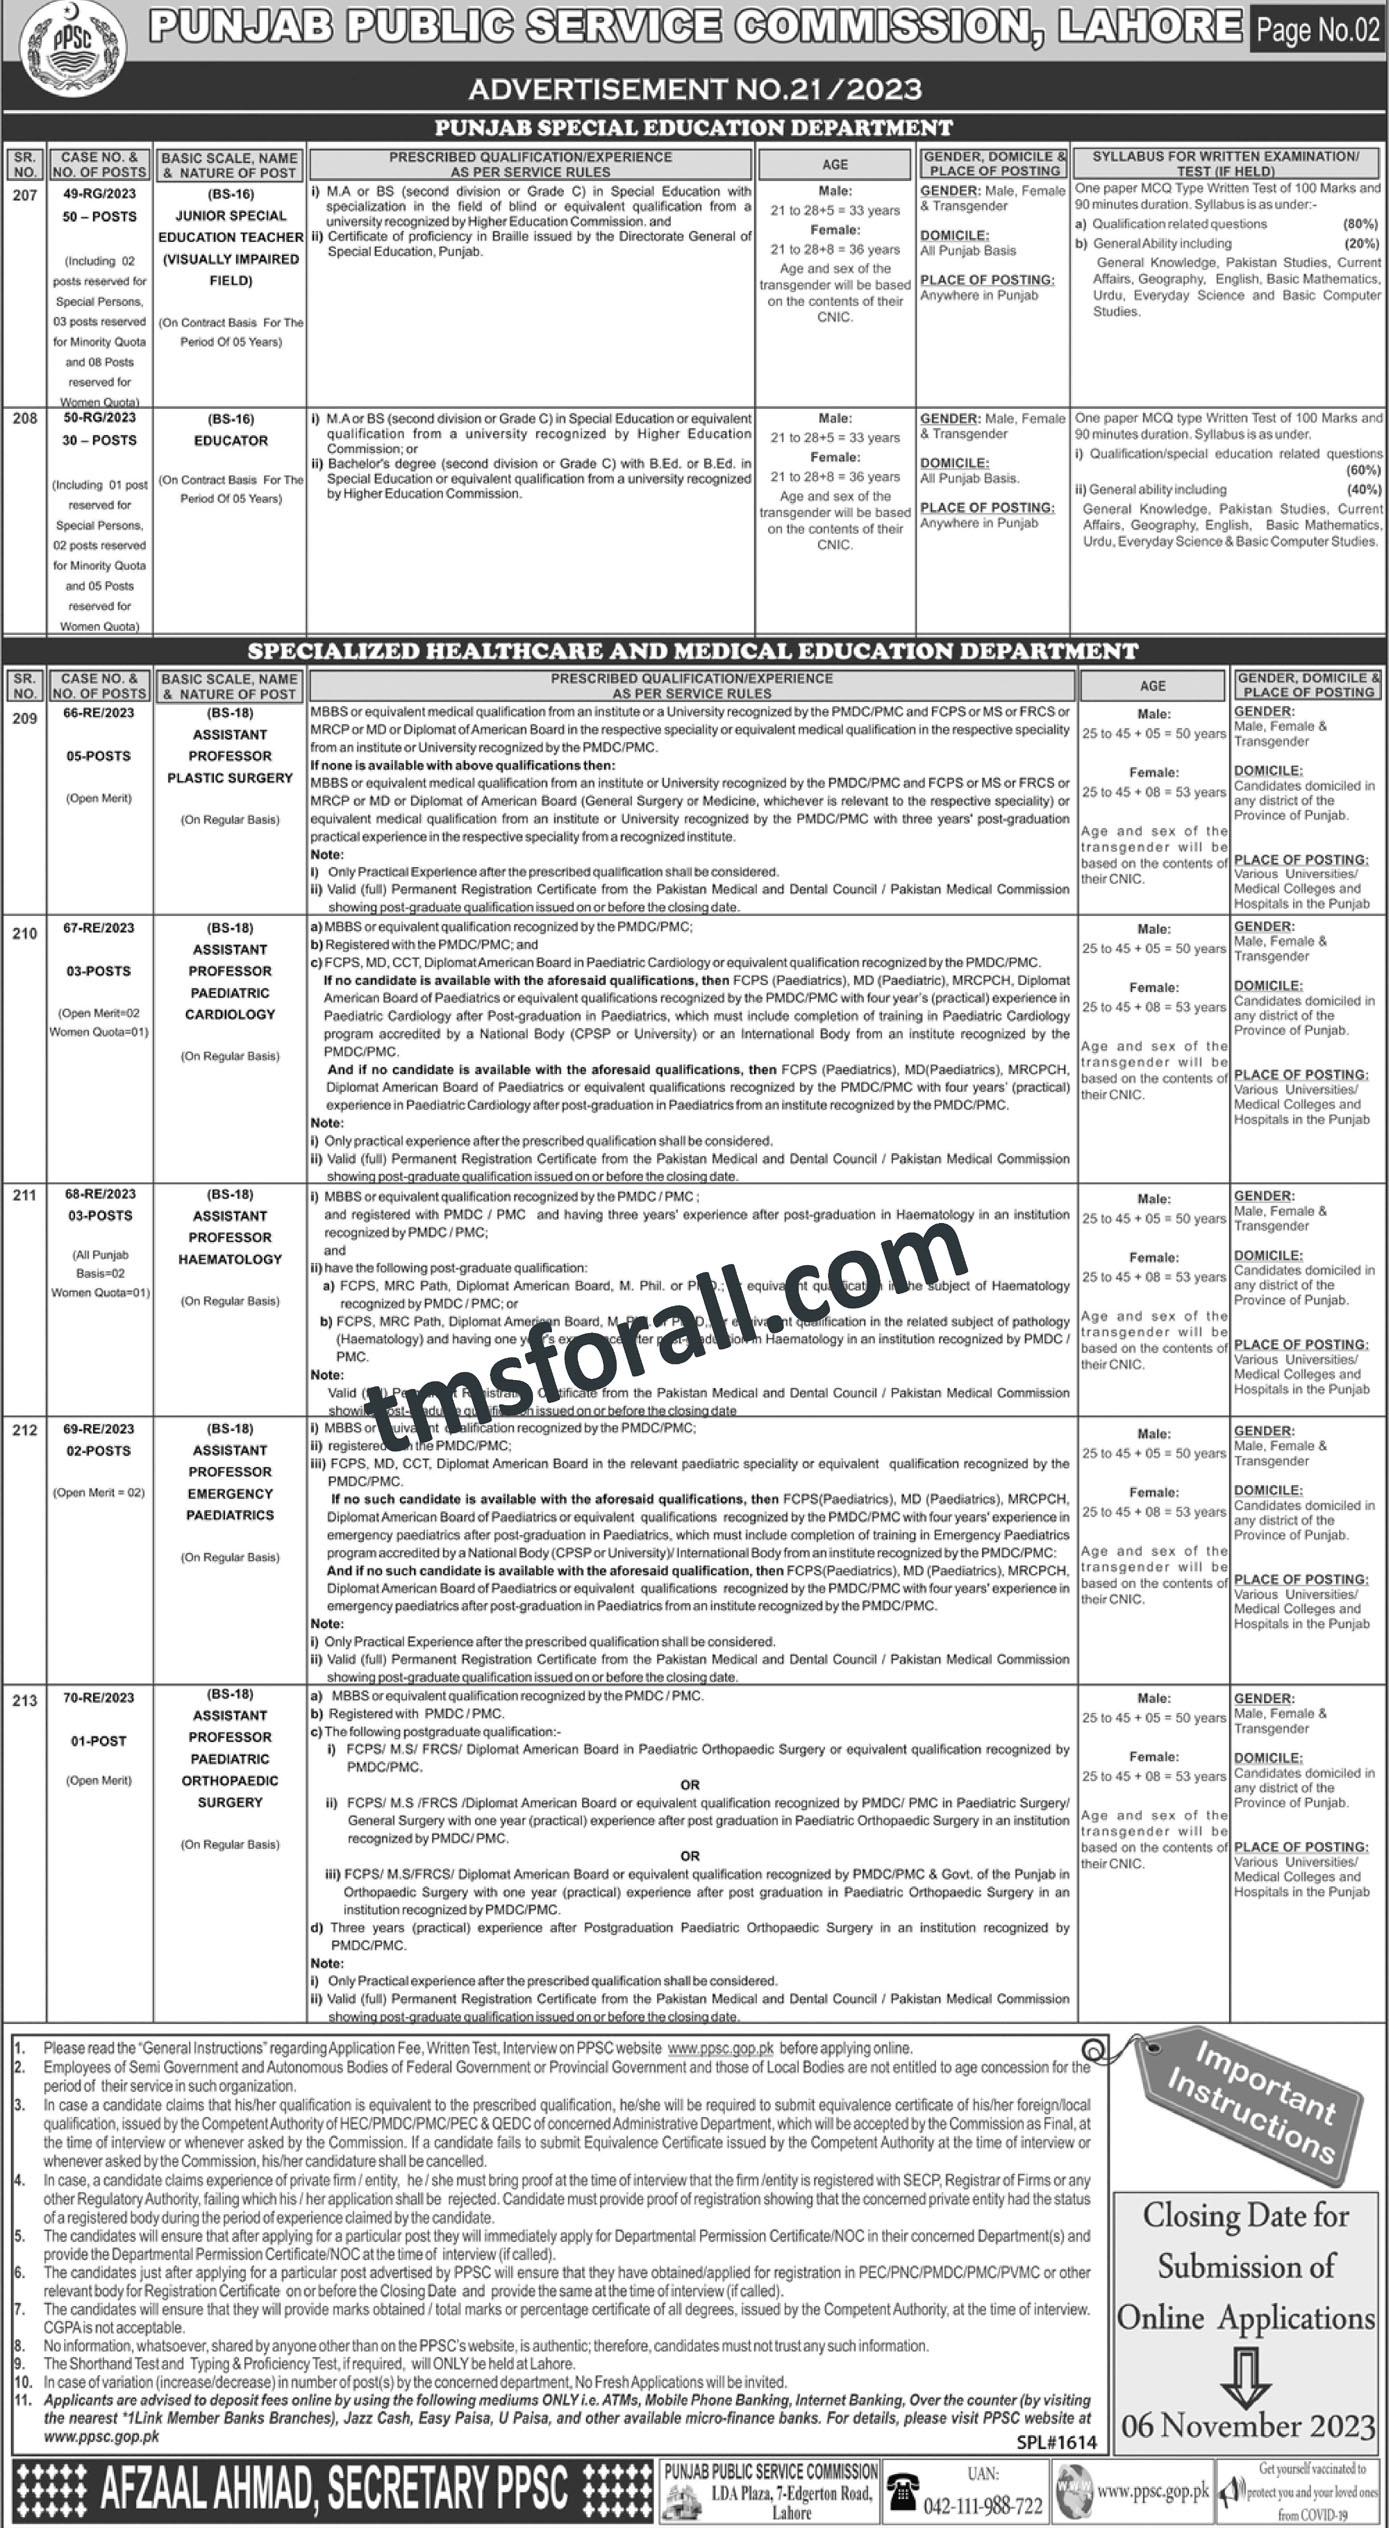 PPSC Special Education Department Jobs 2023